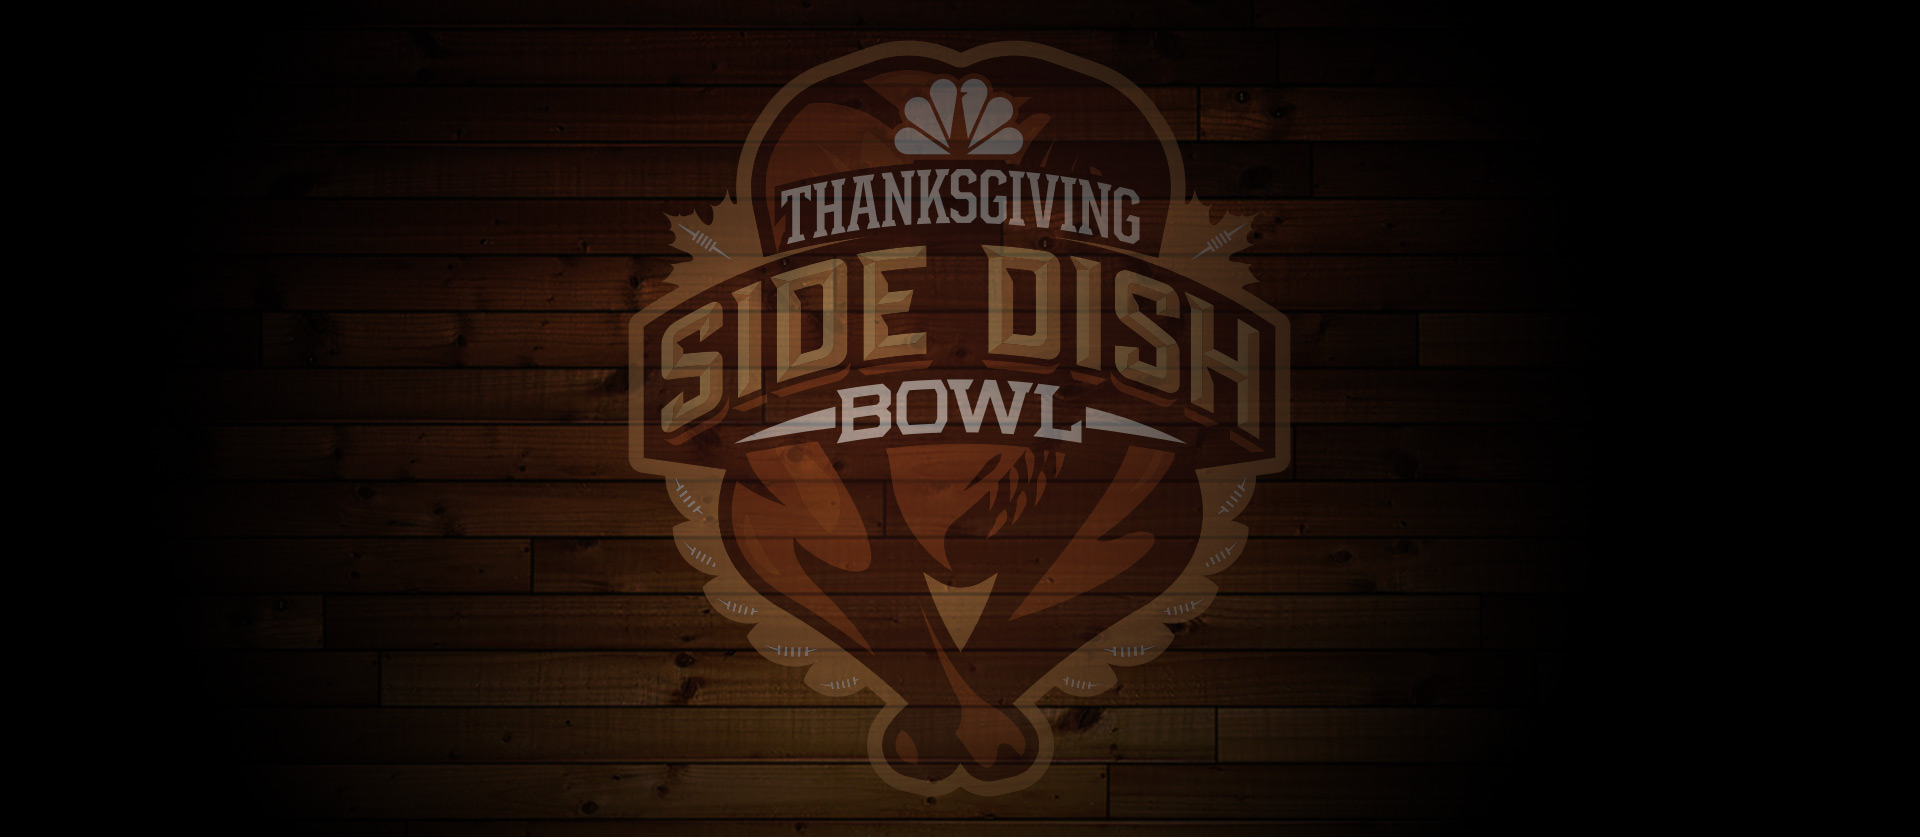 NBC Sports Side Dish Bowl - Full Project Details